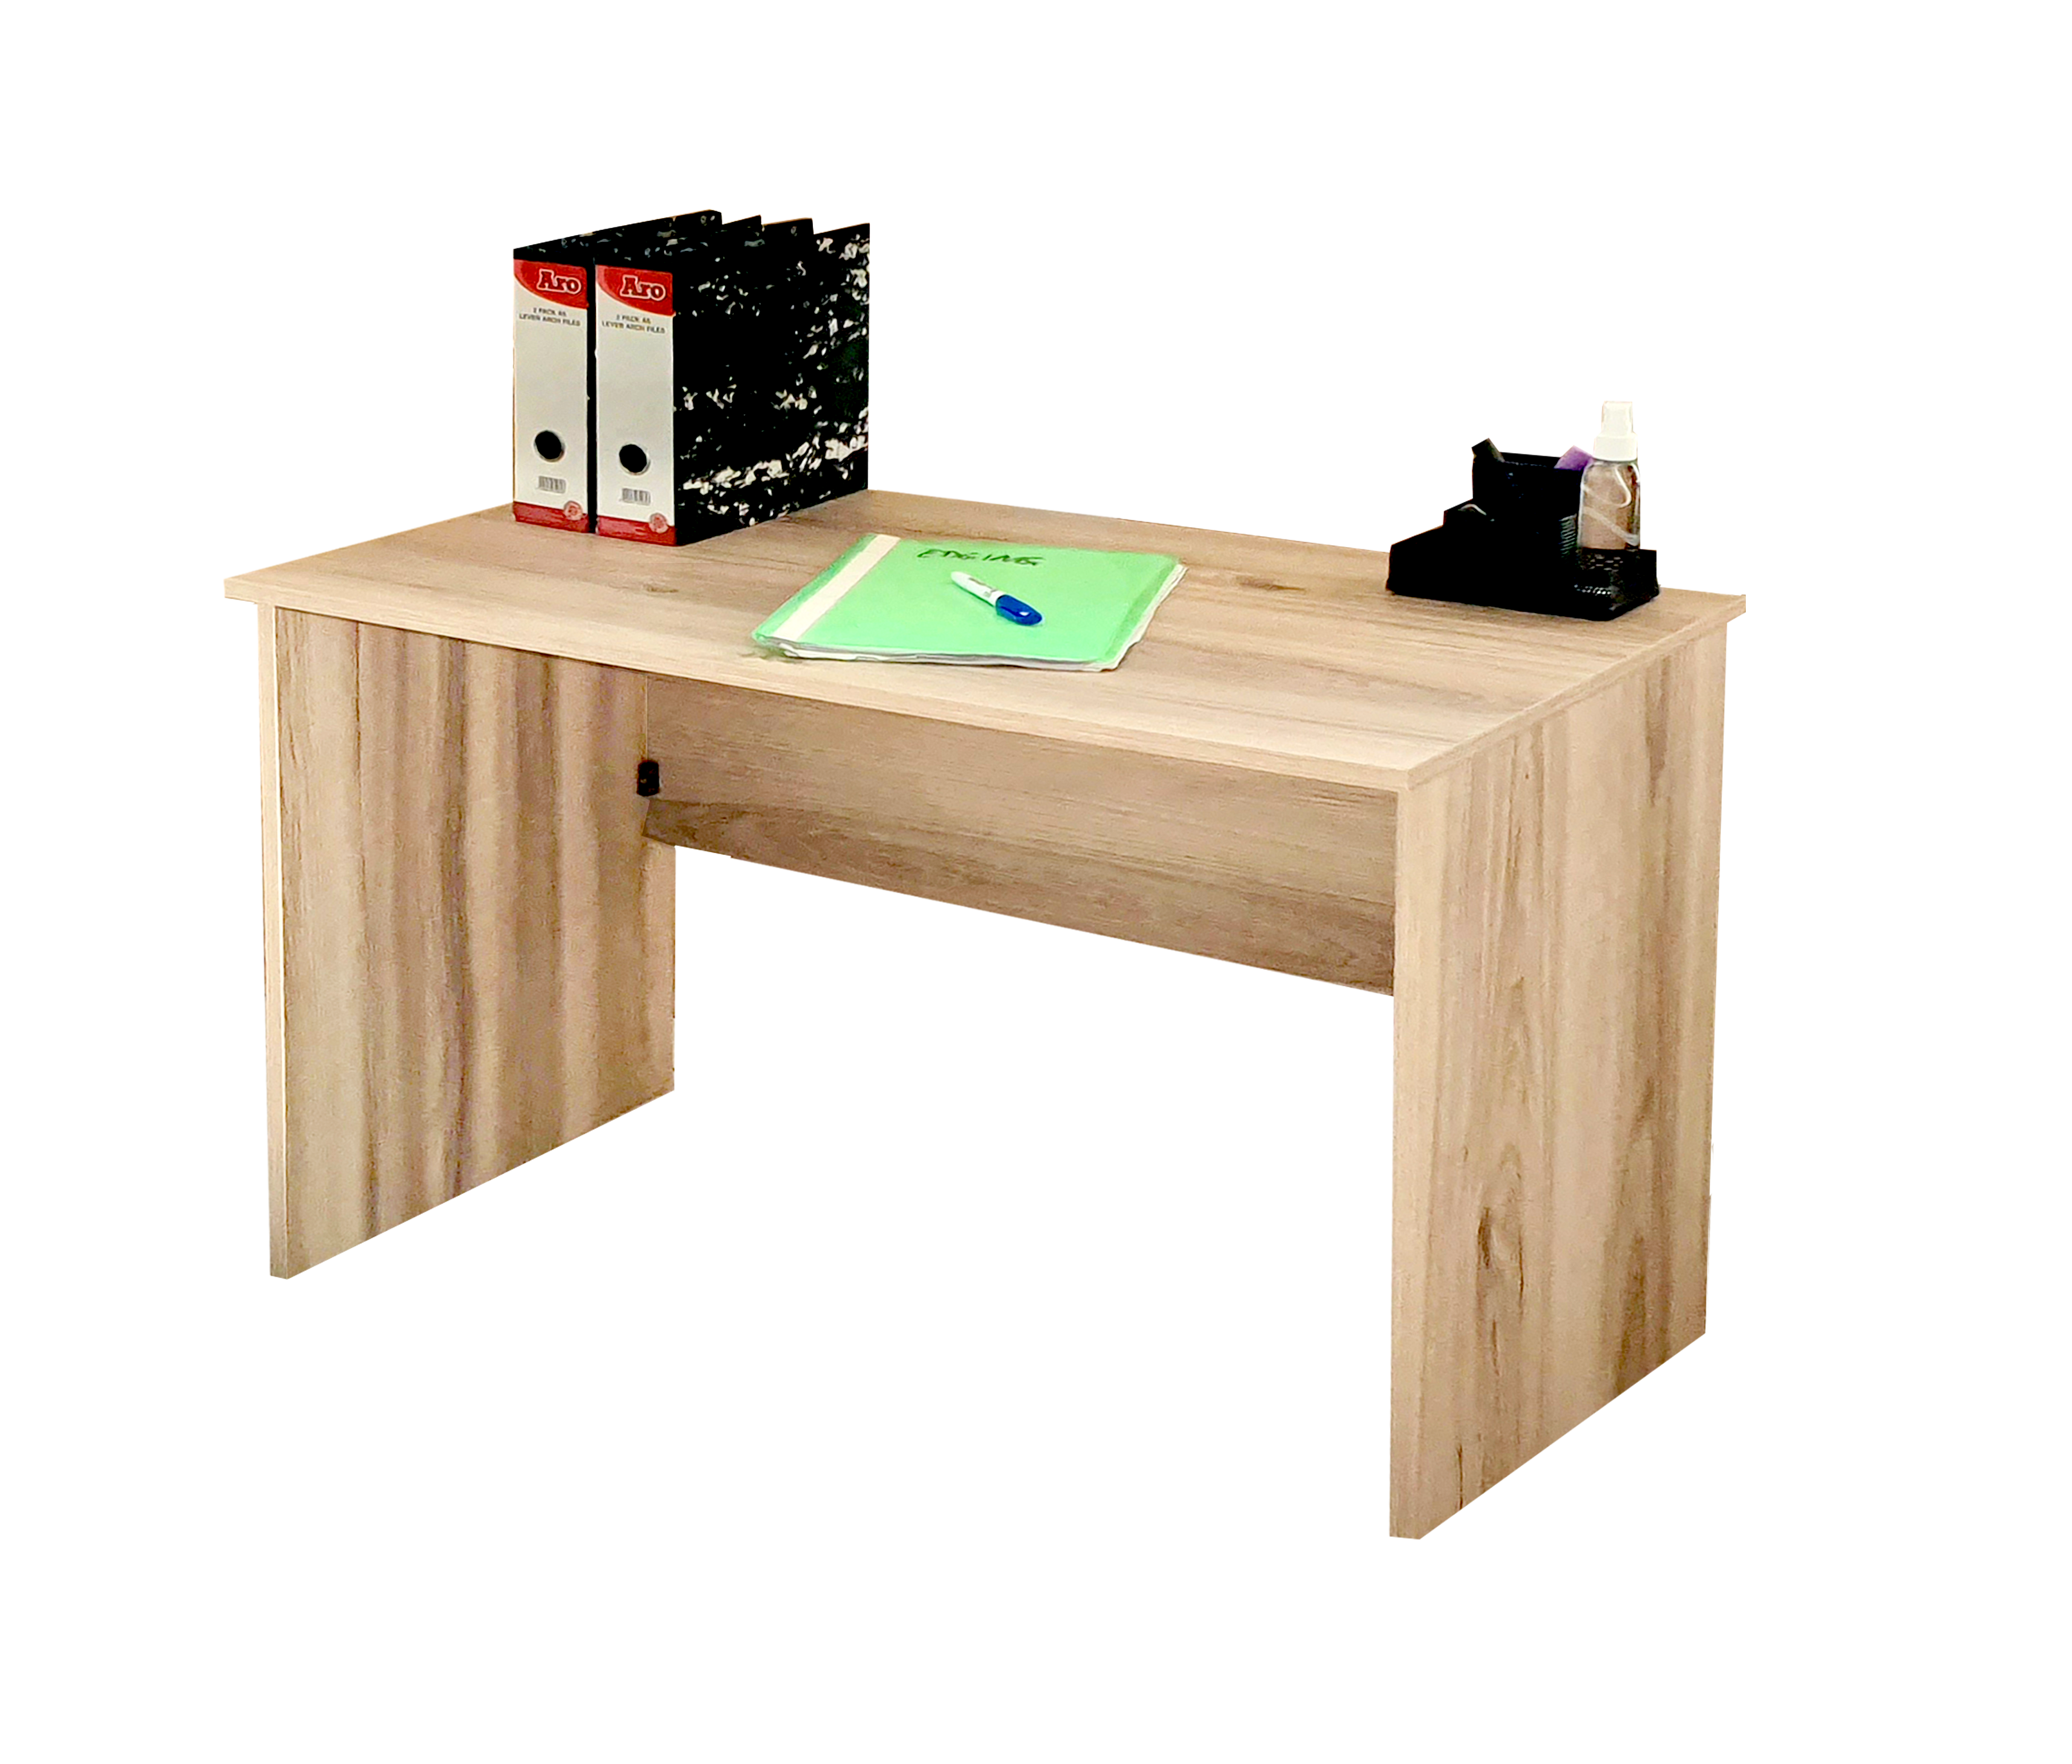 Pre-School Kids Study Desk, 900Wx500Dx650H,Comfortable and Safe - Perfect for Home or Classroom Use